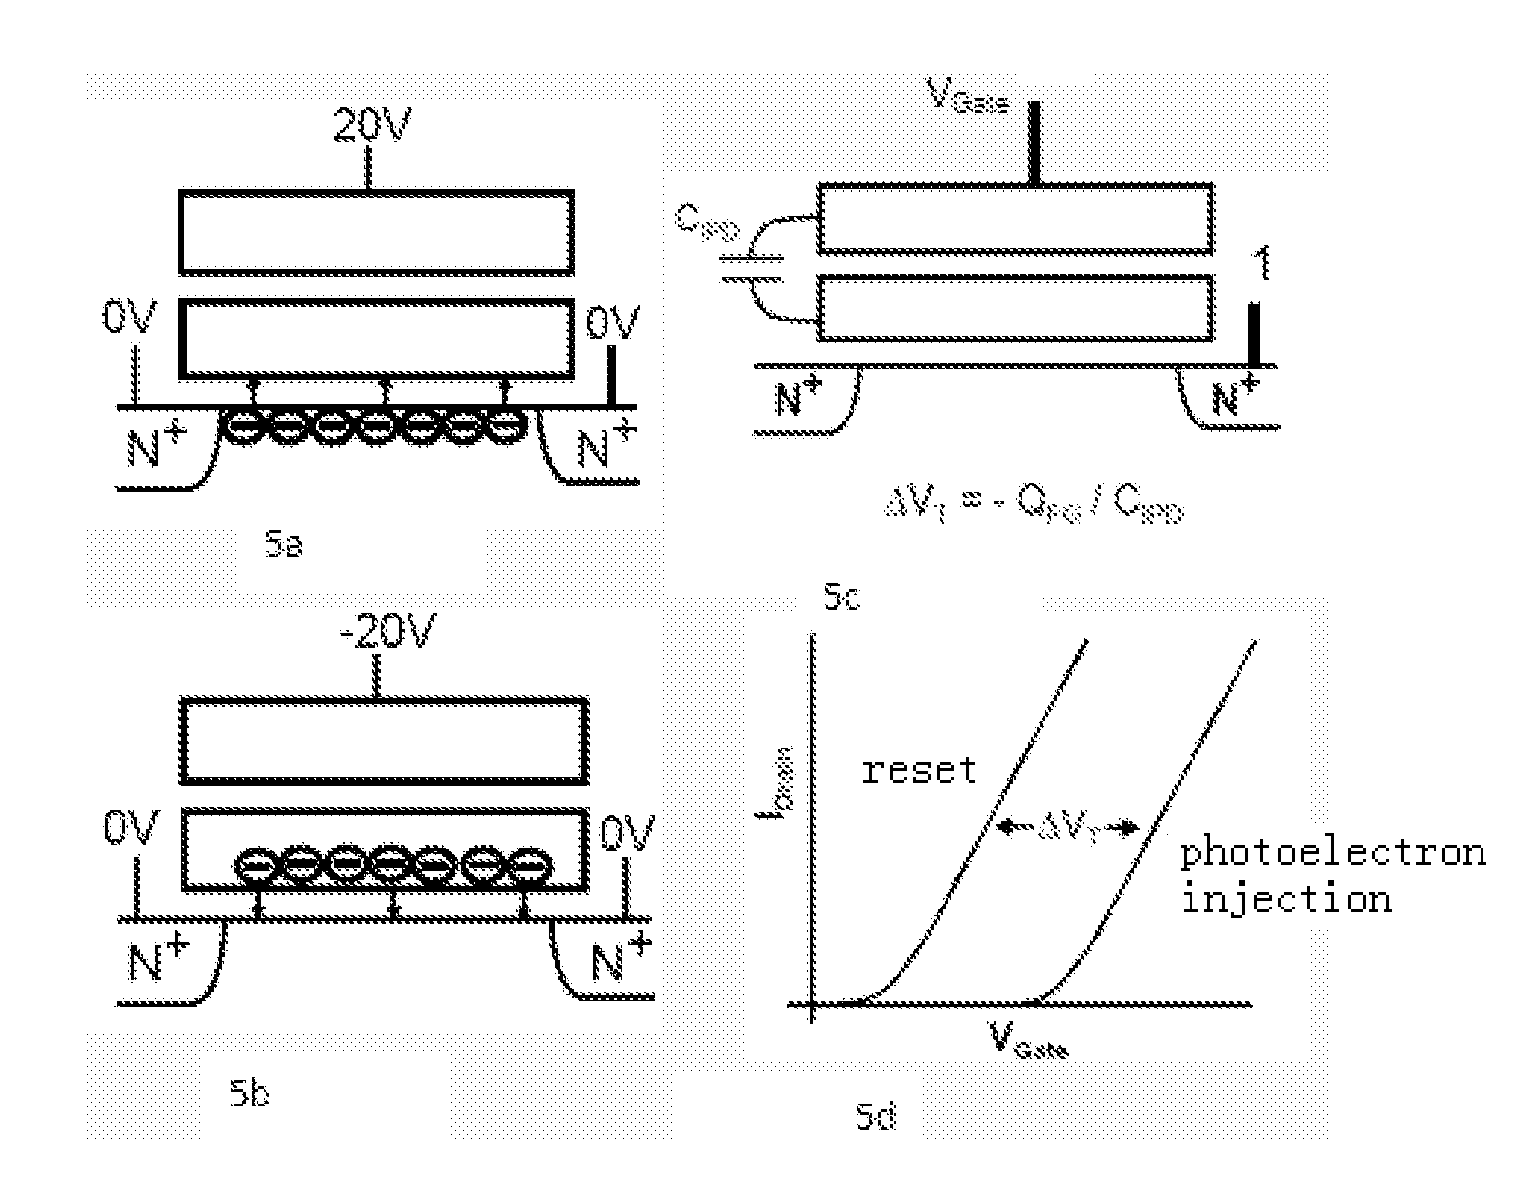 Photosensitive Detector with Composite Dielectric Gate MOSFET Structure and Its Signal Readout Method